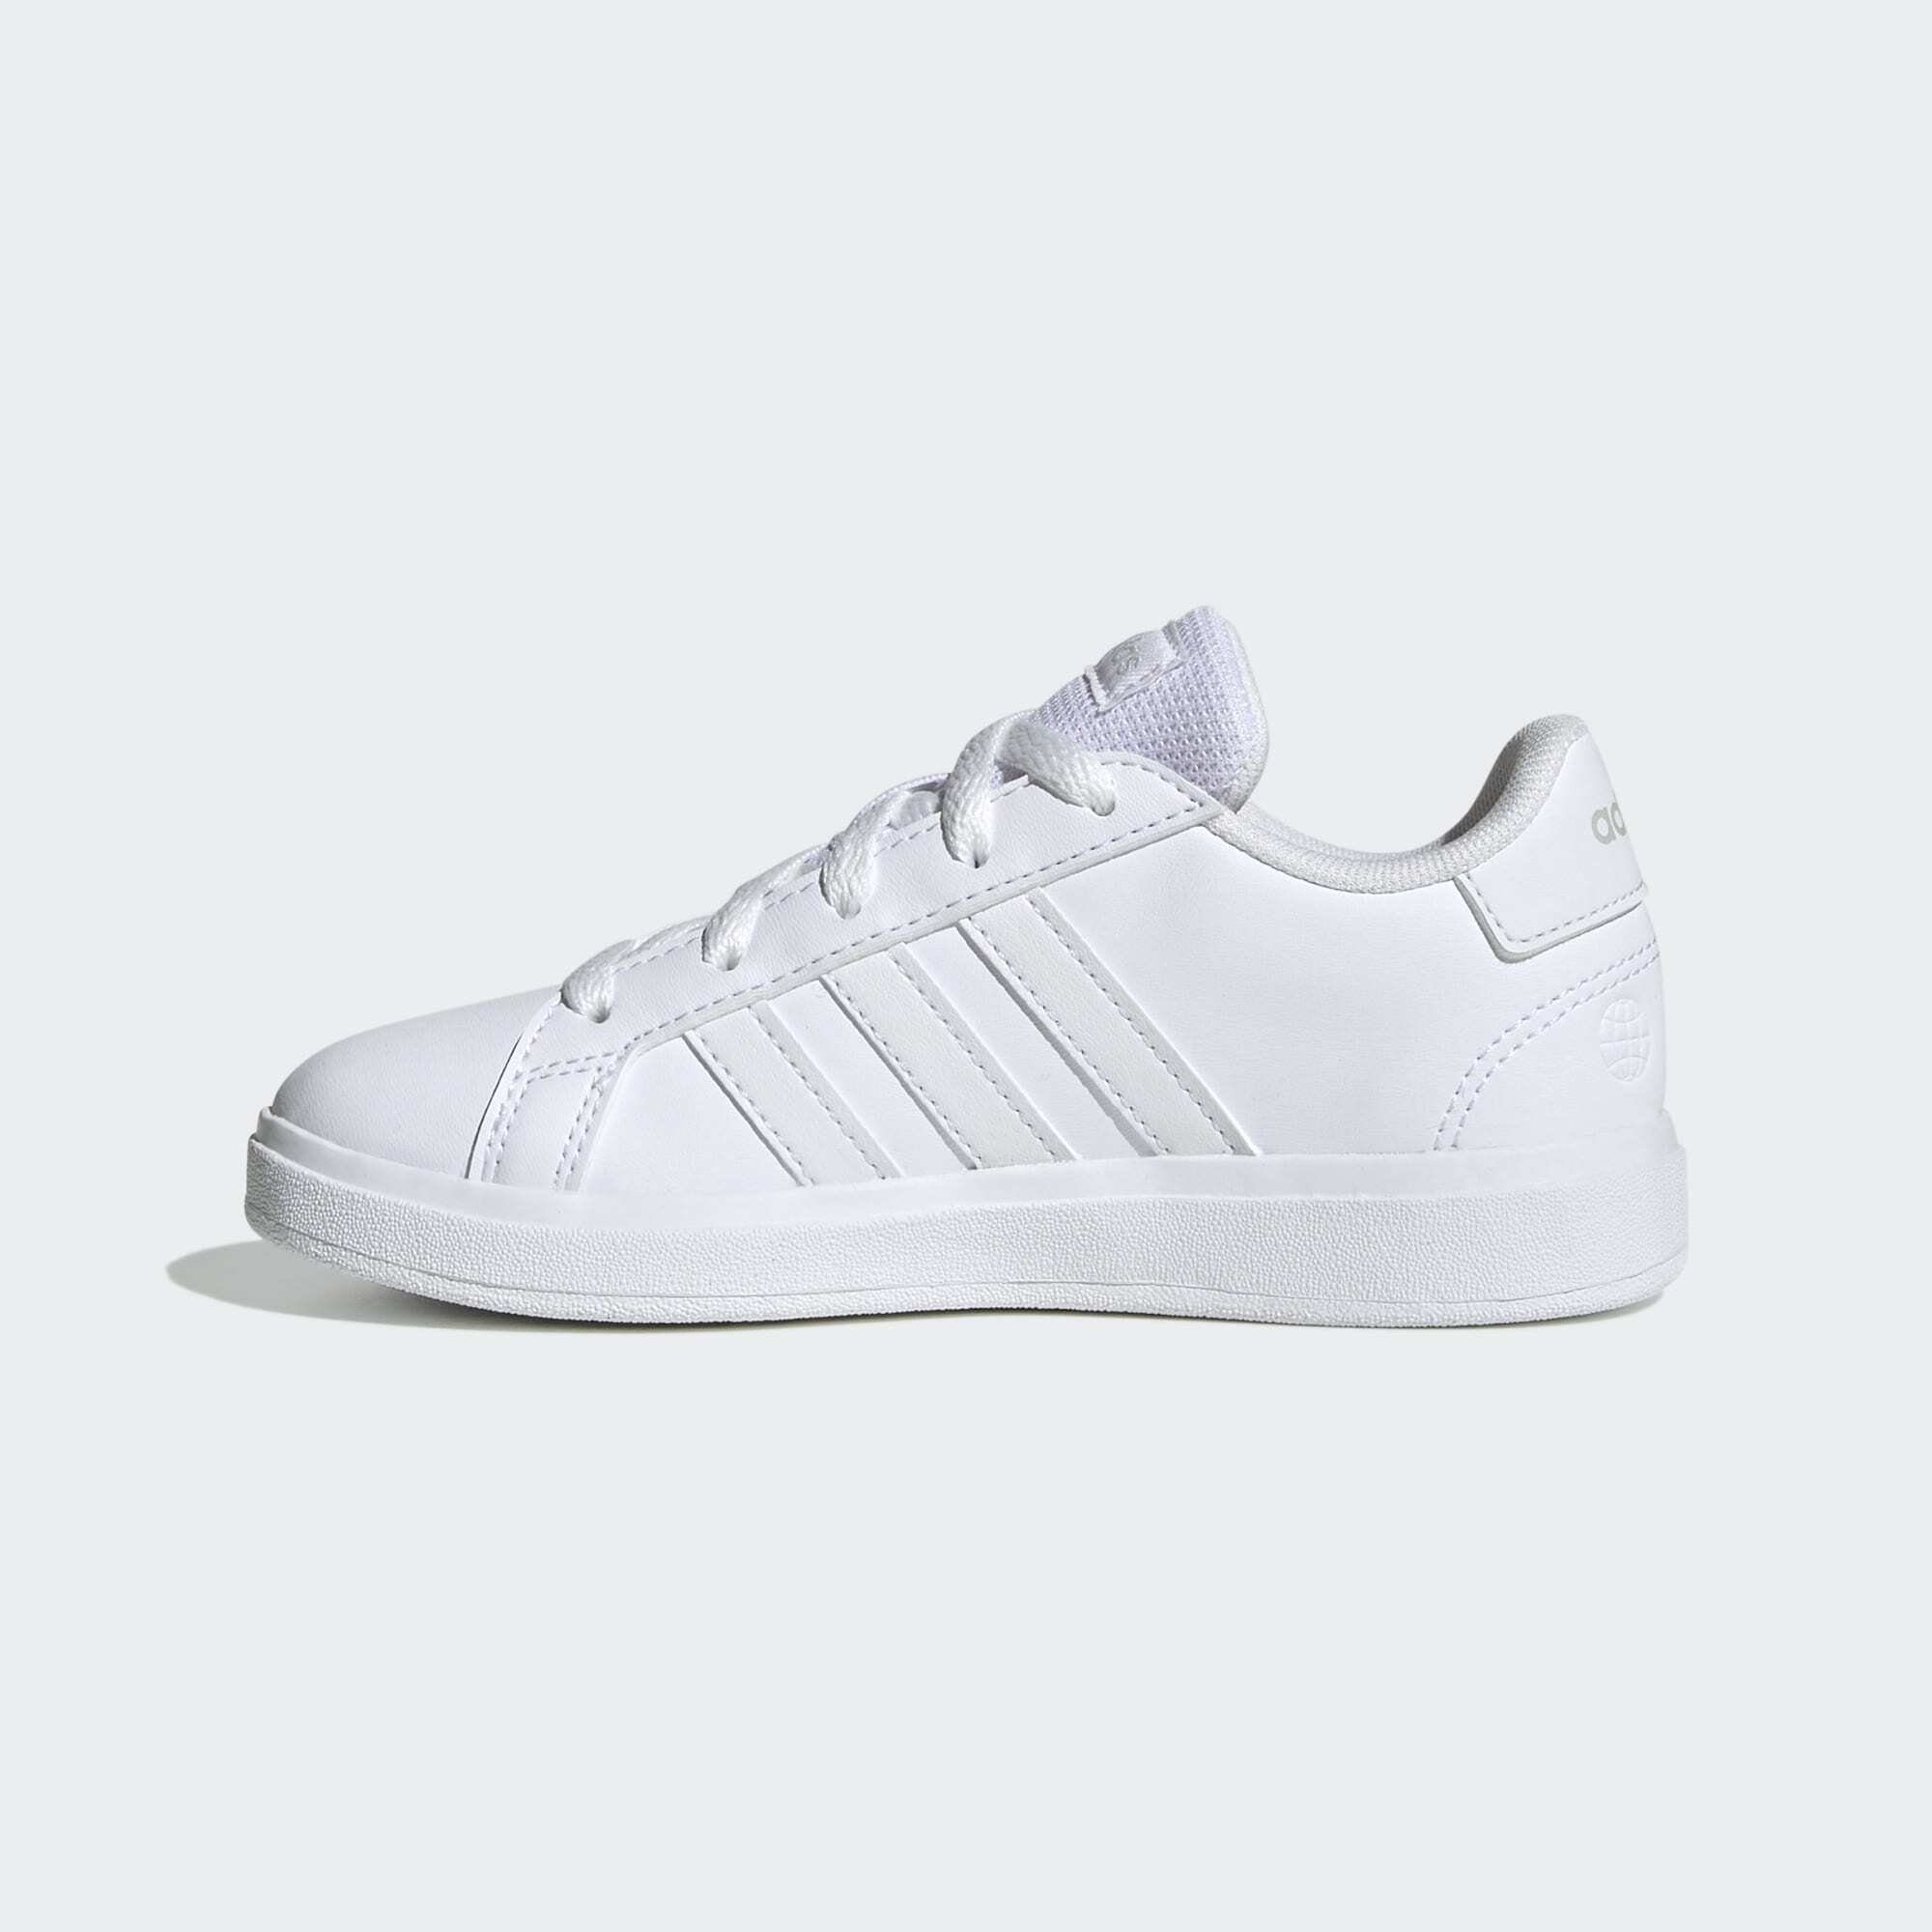 adidas Grey Sportswear One COURT White LACE-UP TENNIS Cloud LIFESTYLE / SCHUH Sneaker Cloud / GRAND White